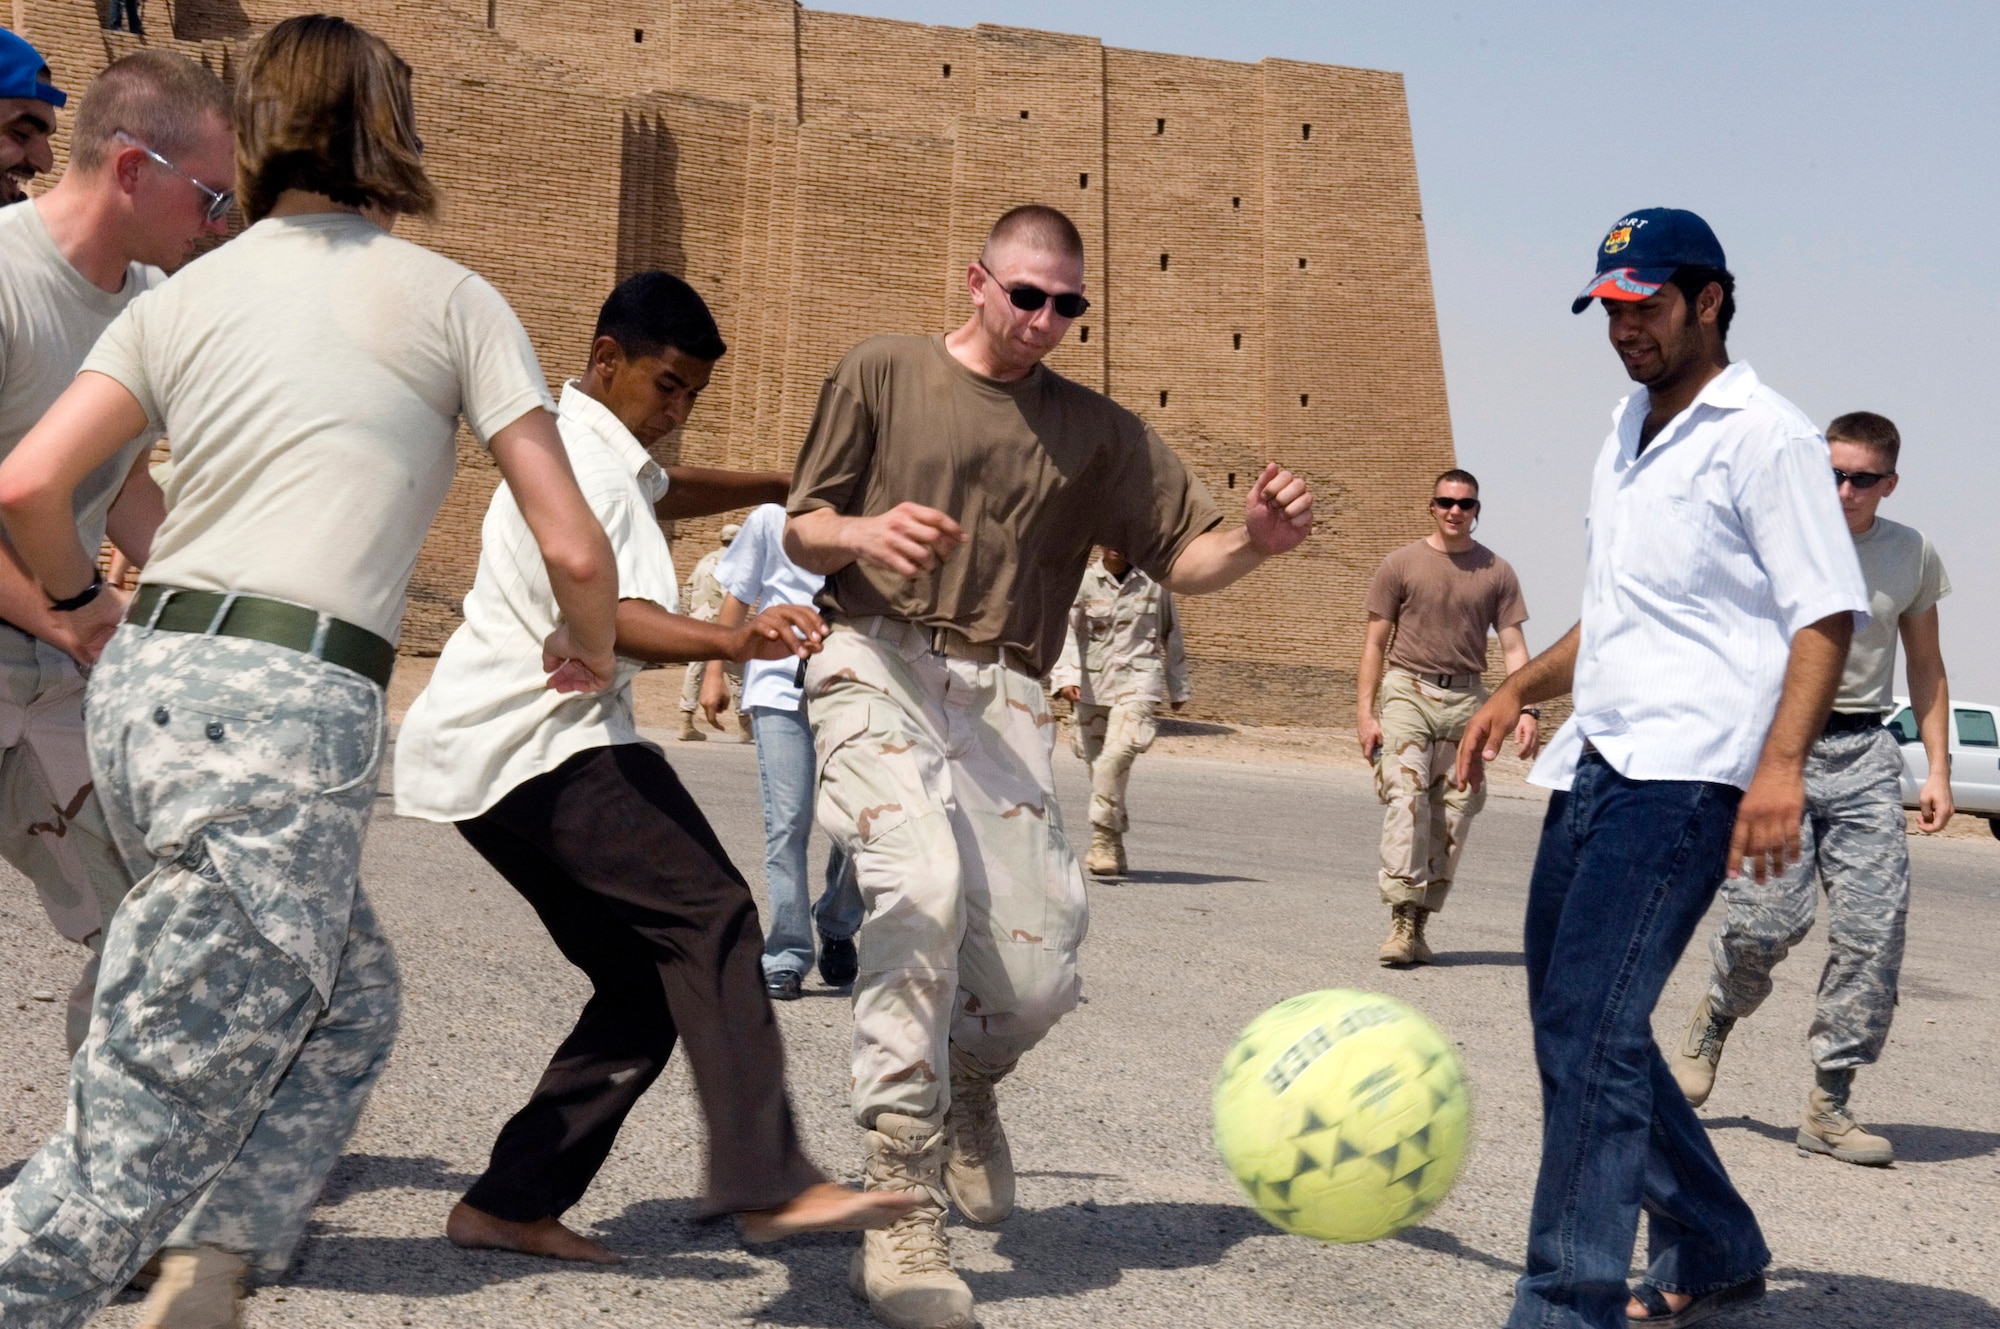 Airmen, Soldiers and local Iraqi citizens play soccer during an Aug. 21 visit by 80 Iraqi citizens to the historical Ziggurat located on Ali Air Base, Iraq. The Ali AB First Four Council sponsored the visit. This is the first time in more than 10 years that Iraqi civilians have been allowed to step on the grounds of the historical site, which was built in the ancient city of Ur and includes the house of the biblical prophet Abraham (U.S. Air Force photo/Master Sgt. Robert W. Valenca) 
